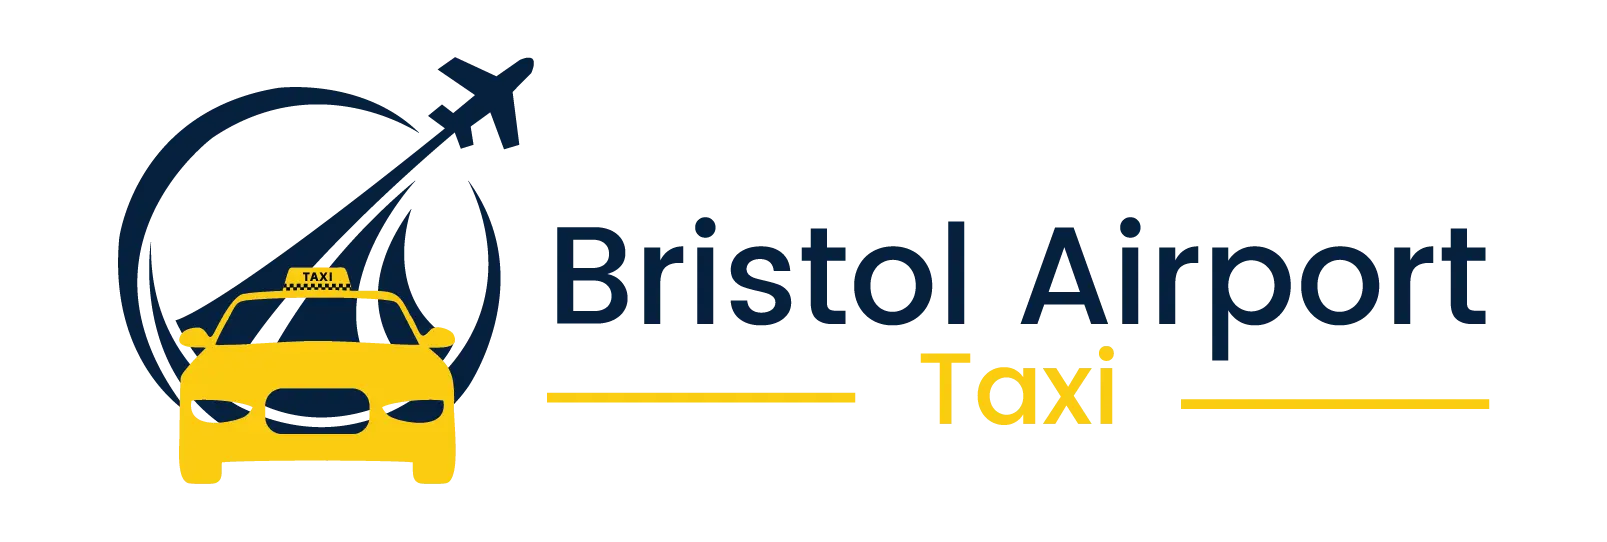 bristol airport taxi - How to get to Bristol City Centre from airport